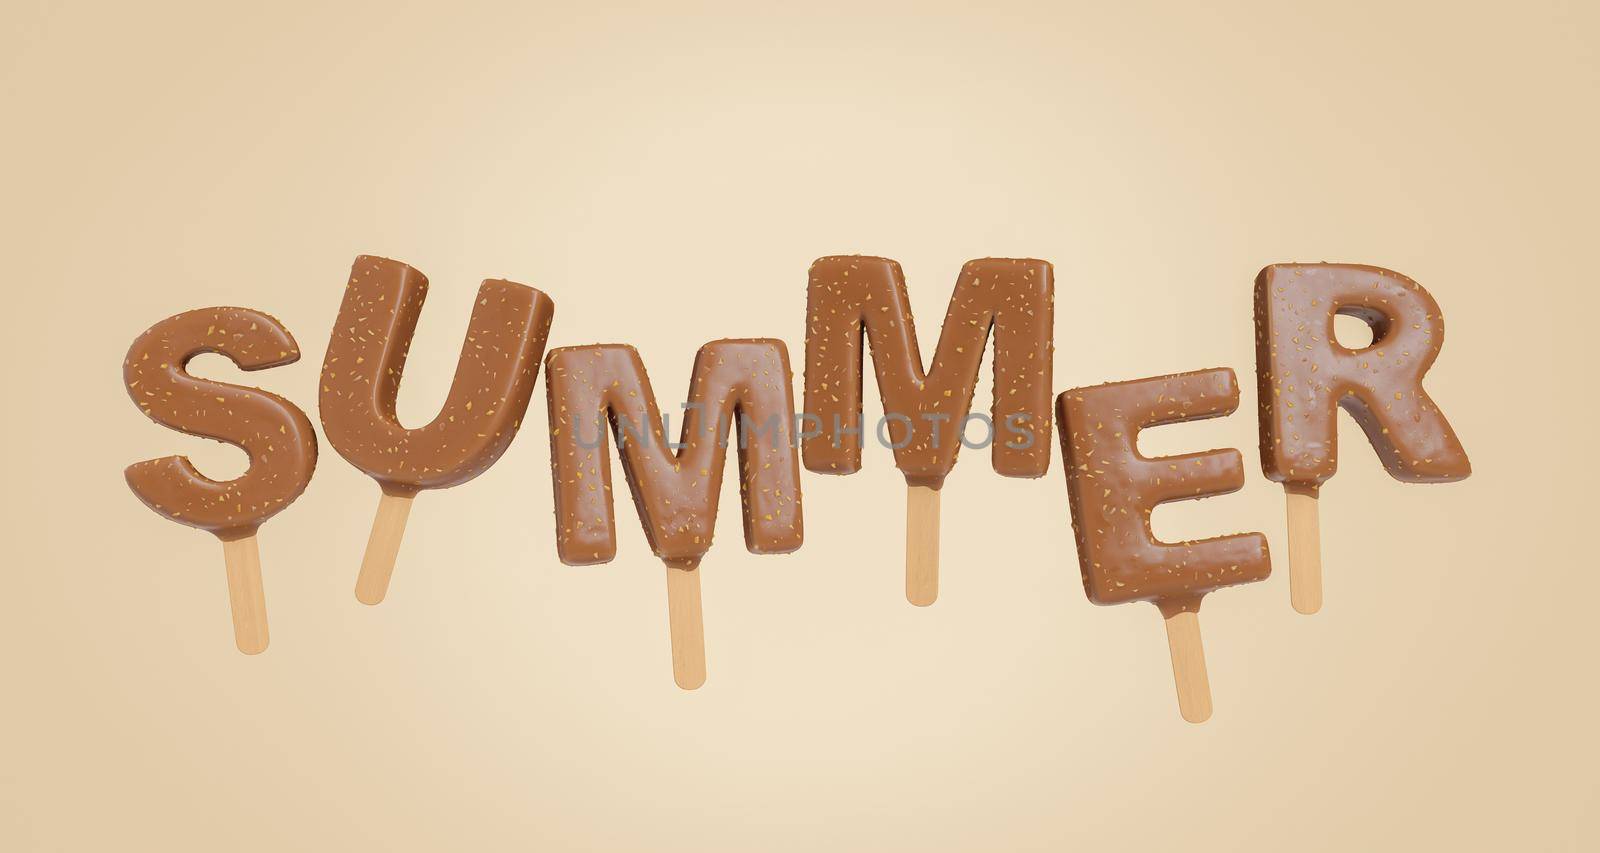 Creative 3D rendering of Summer letter ice cream bars with chocolate glaze against beige background